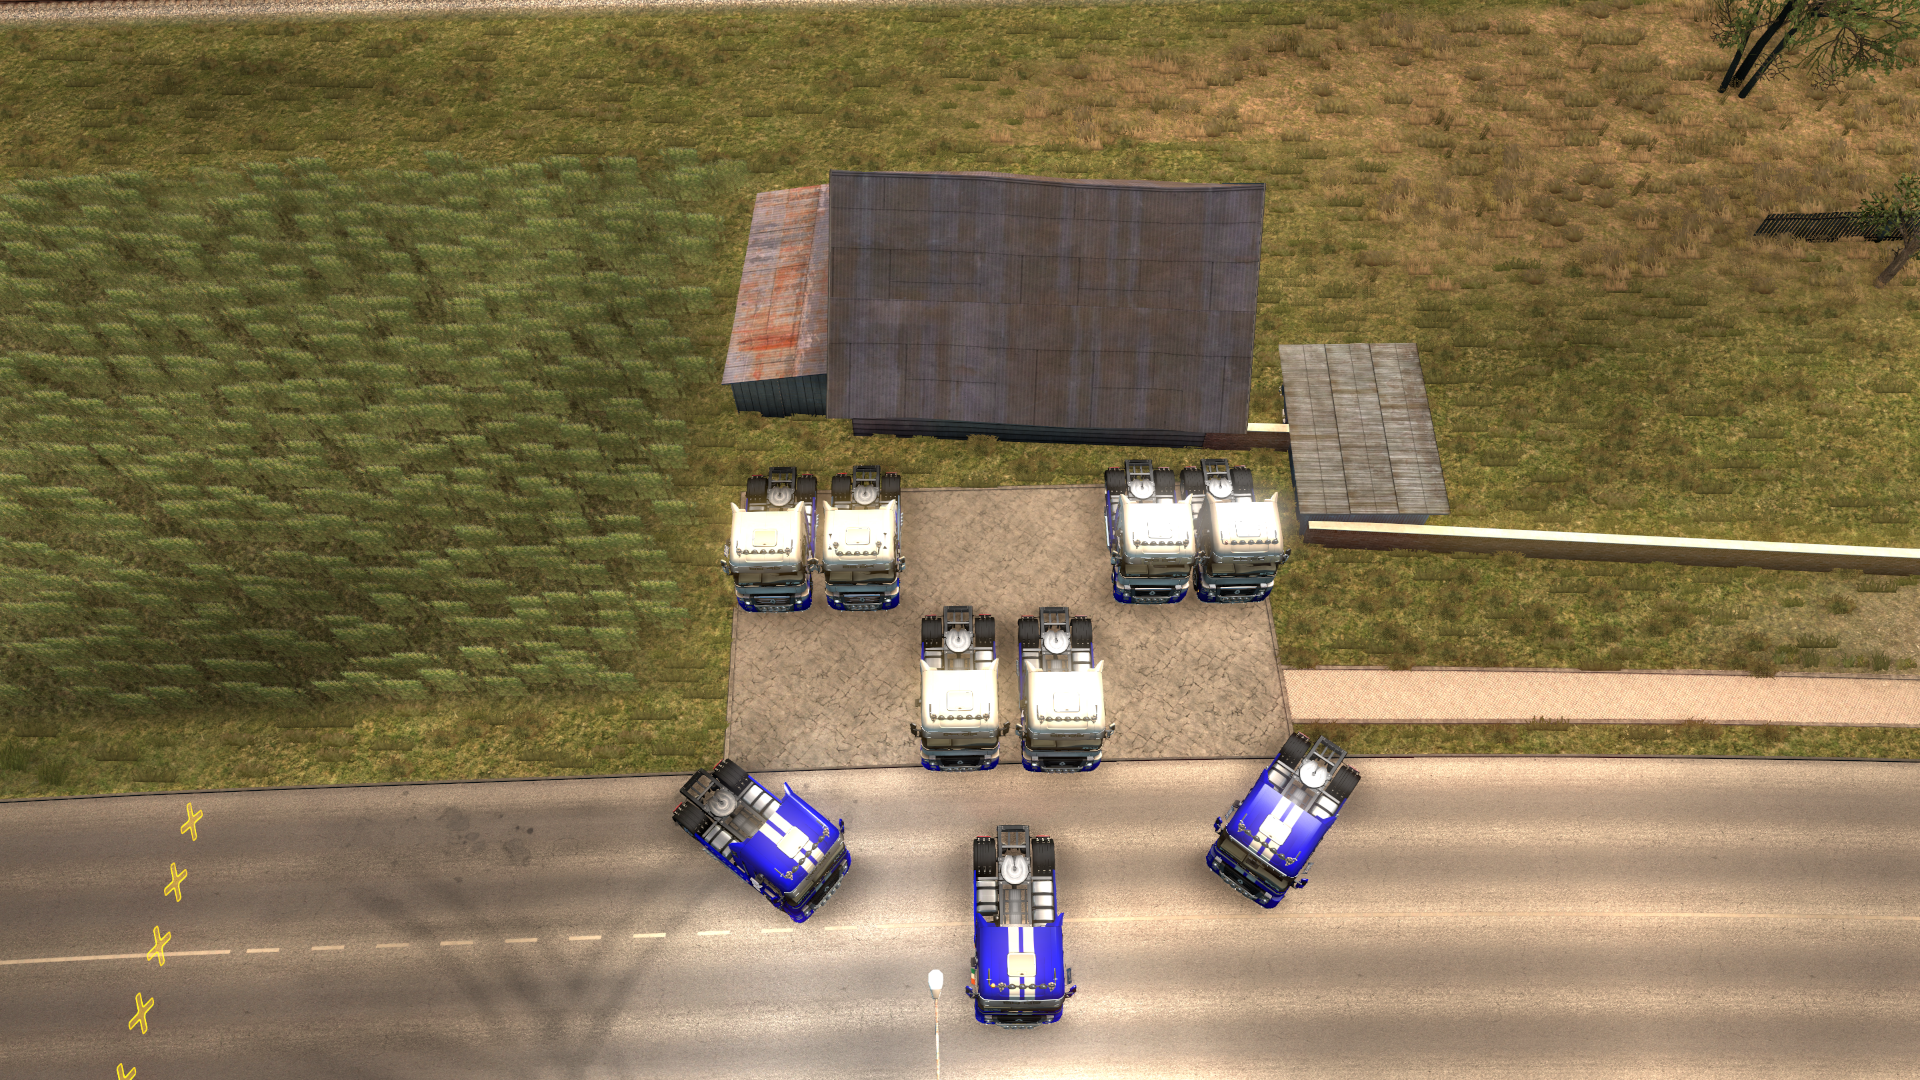 ets2_20210416_234548_00.png